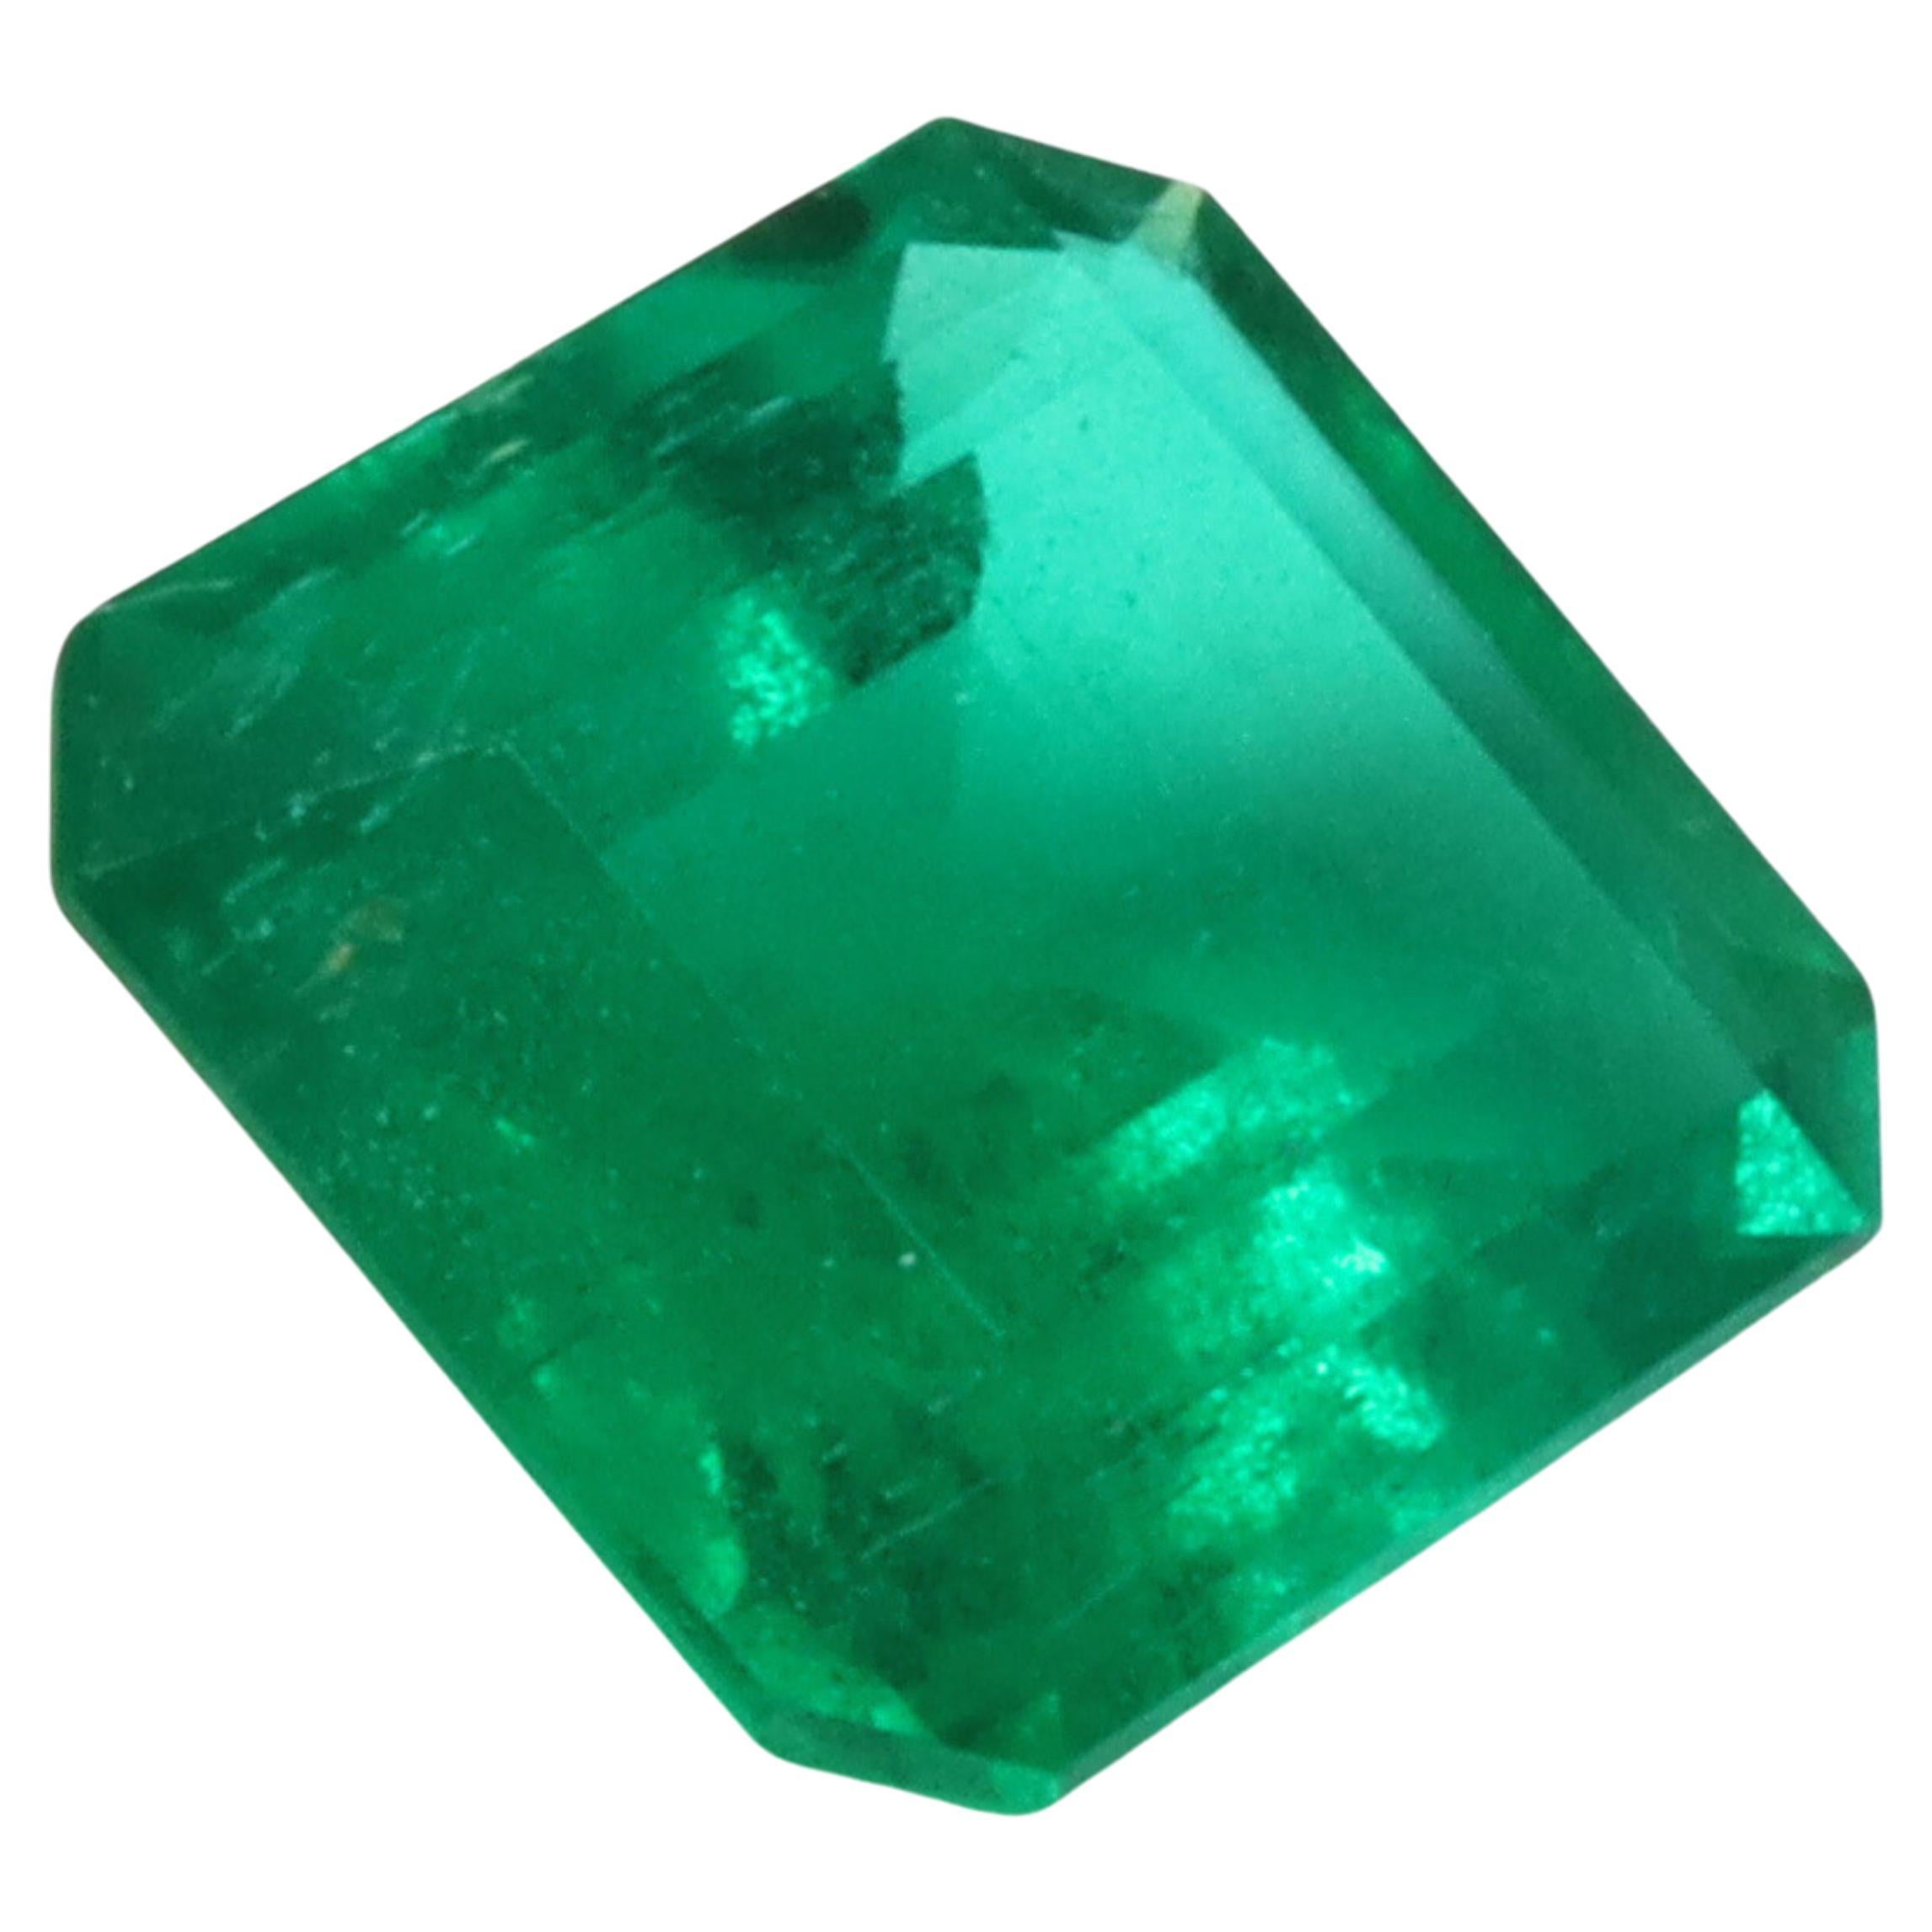 Certified Vivid green Emerald - Minor Oil - 1.56ct For Sale